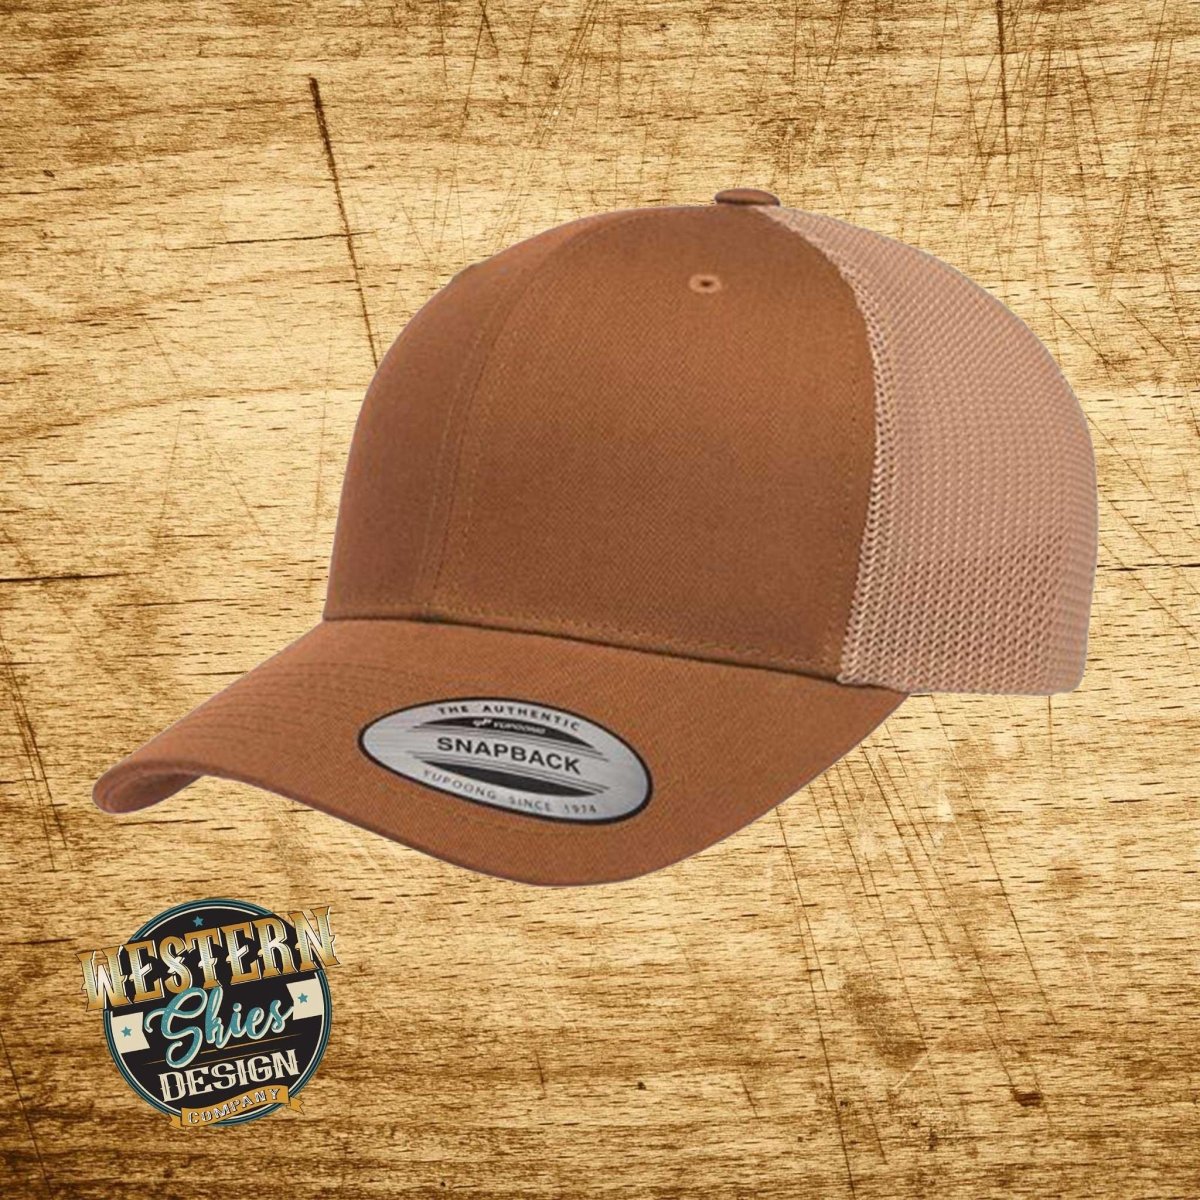 Hat Classic Skies 6606 – Yupoong Western Design Trucker Company